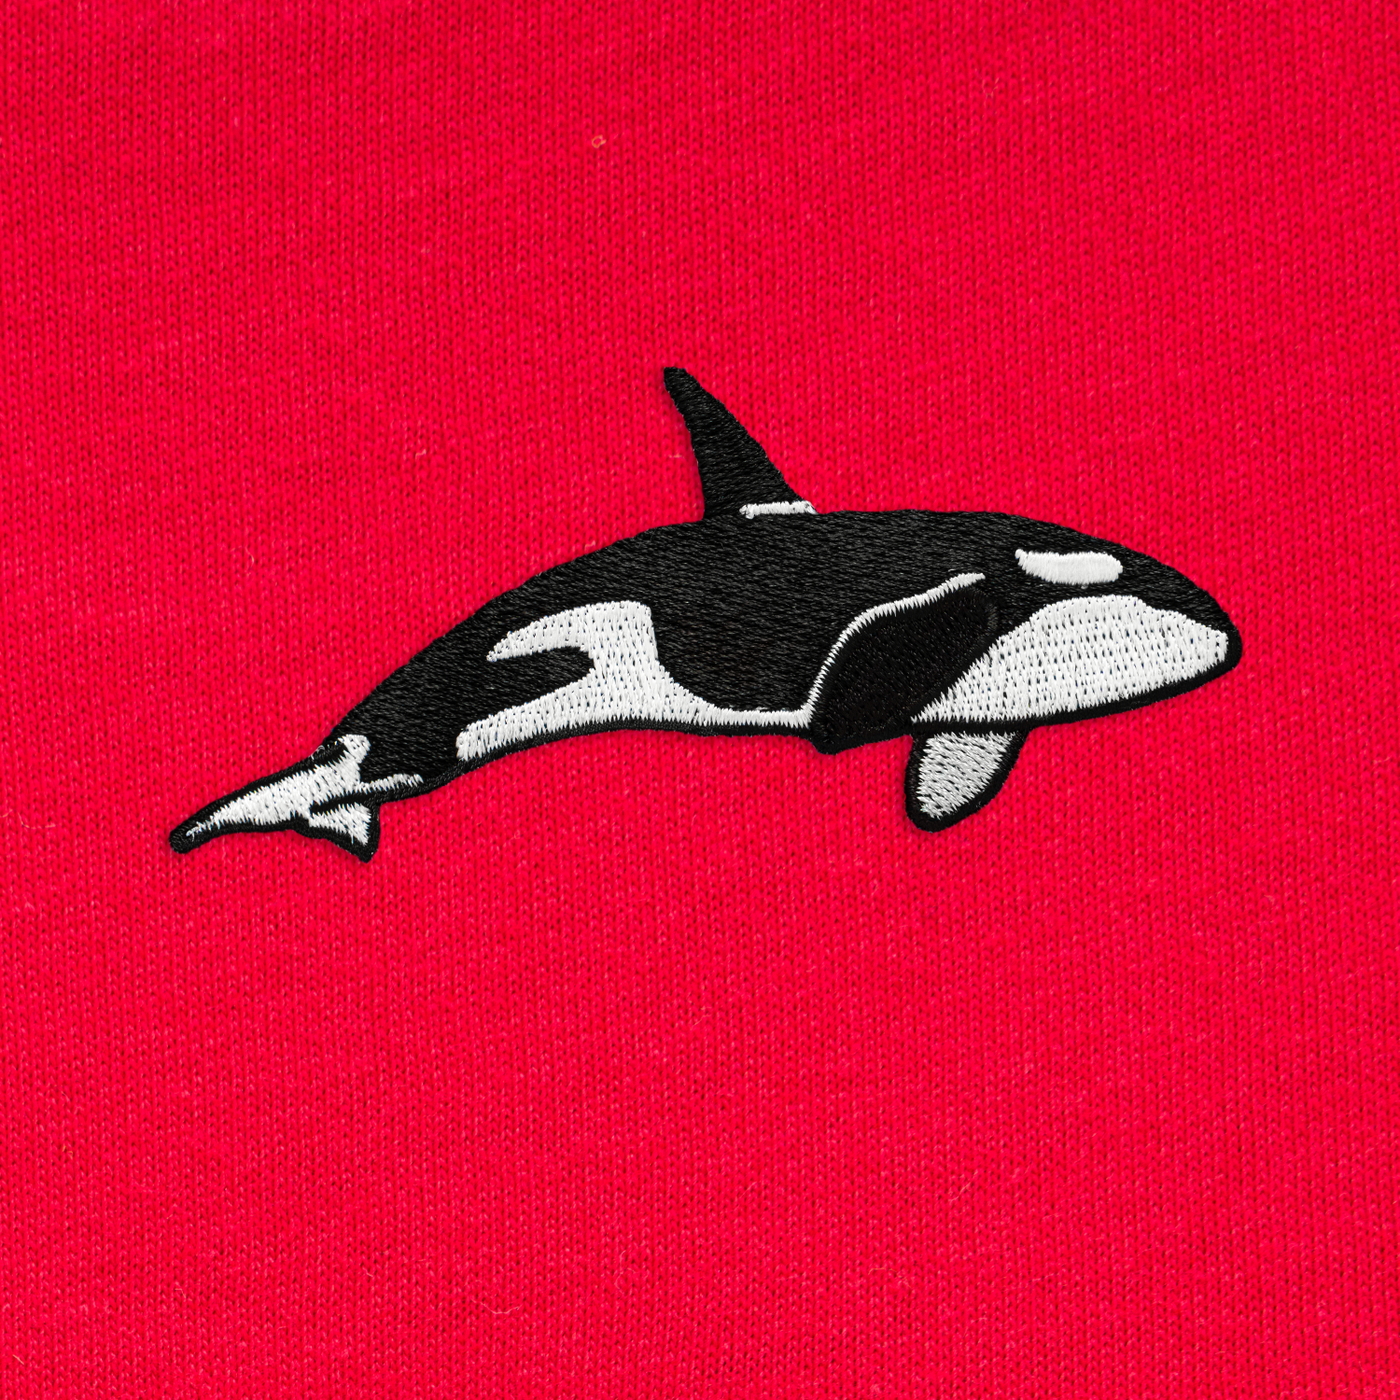 Bobby's Planet Women's Embroidered Orca T-Shirt from Seven Seas Fish Animals Collection in Red Color#color_red